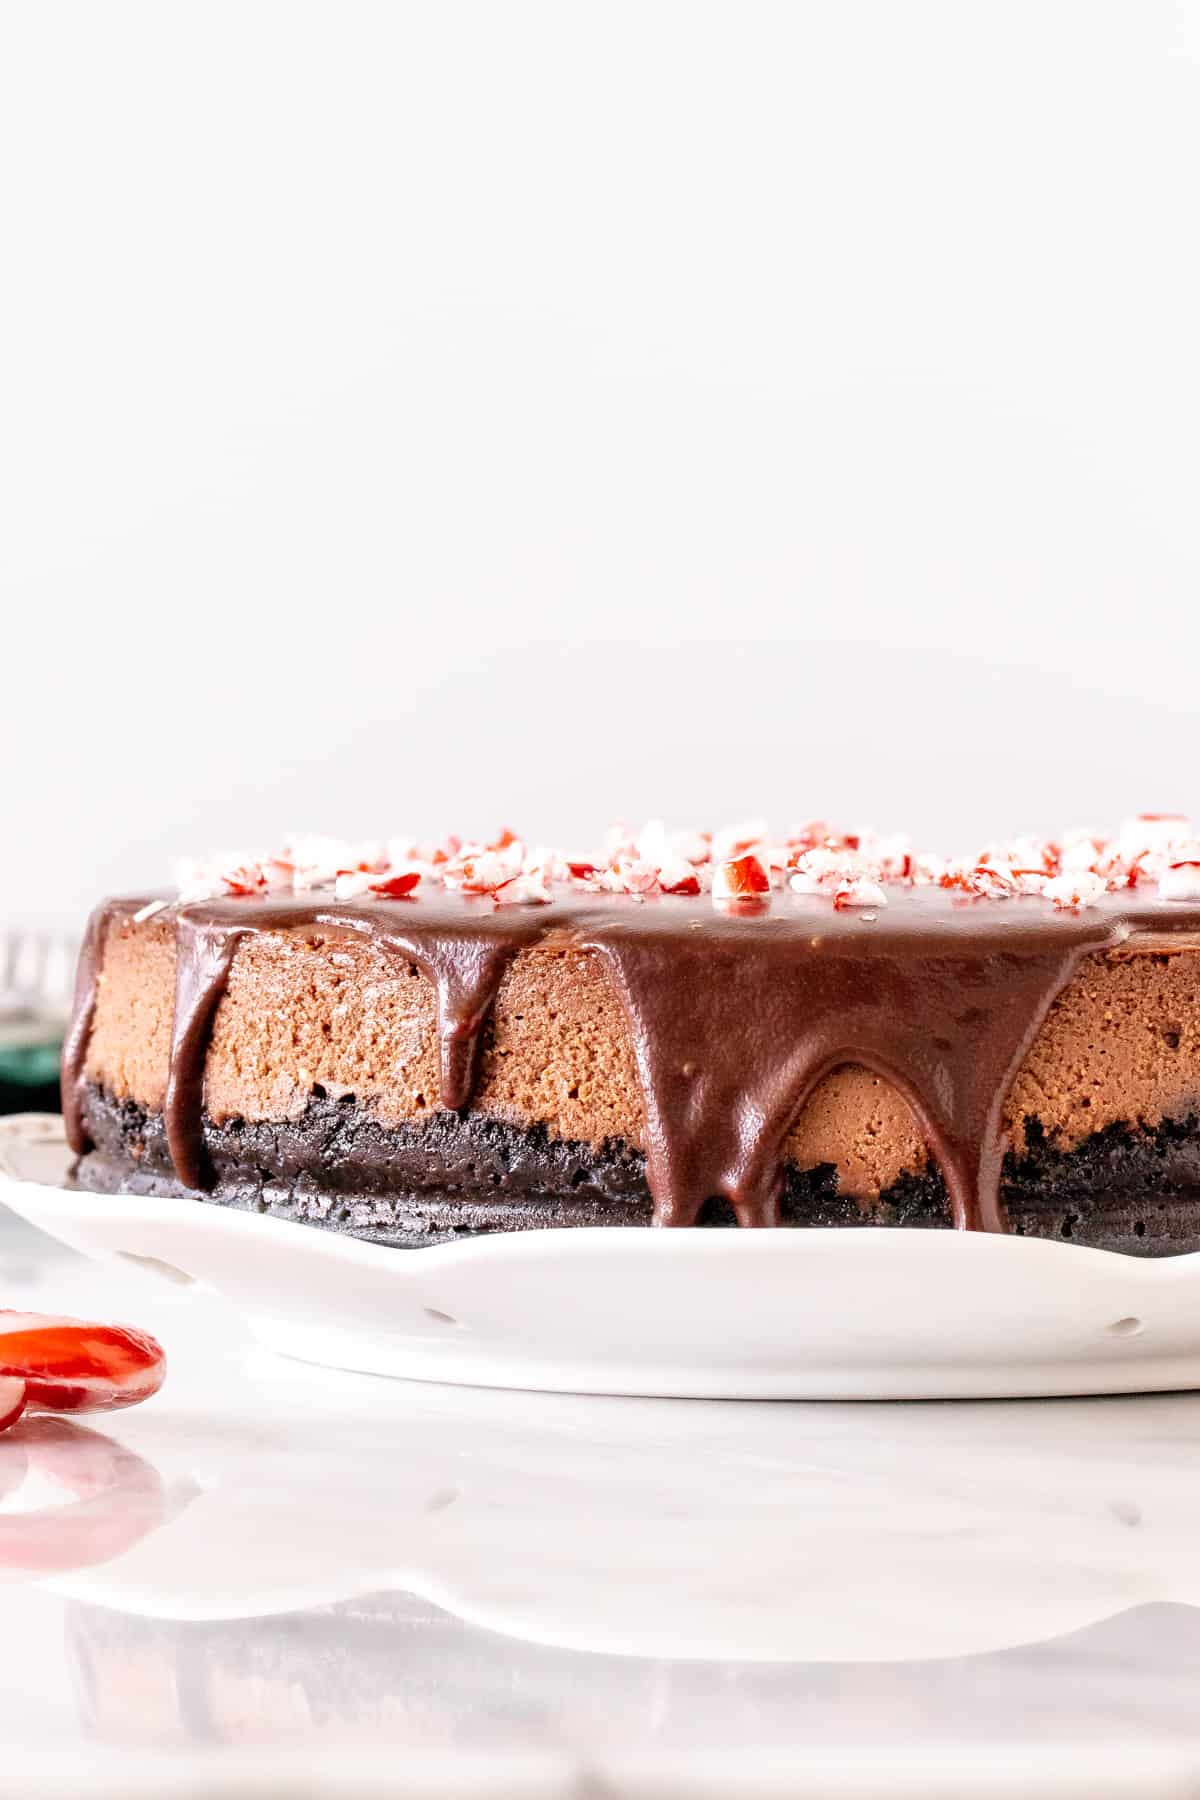 Chocolate cheesecake with chocolate on top and crushed candy canes.